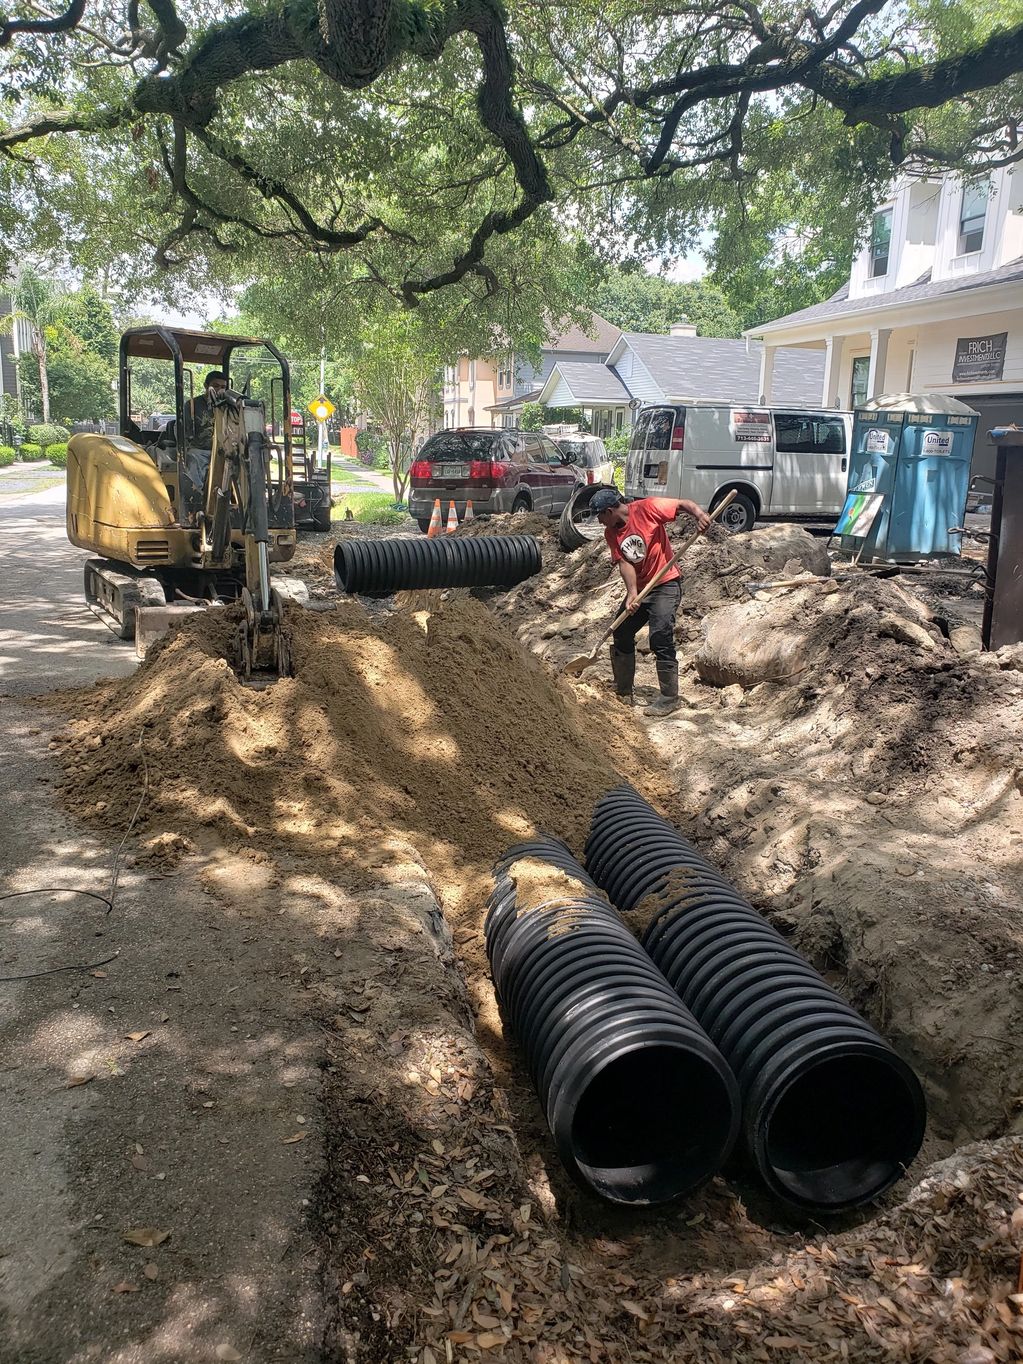 Installing 24" hdpe pipe for a driveway